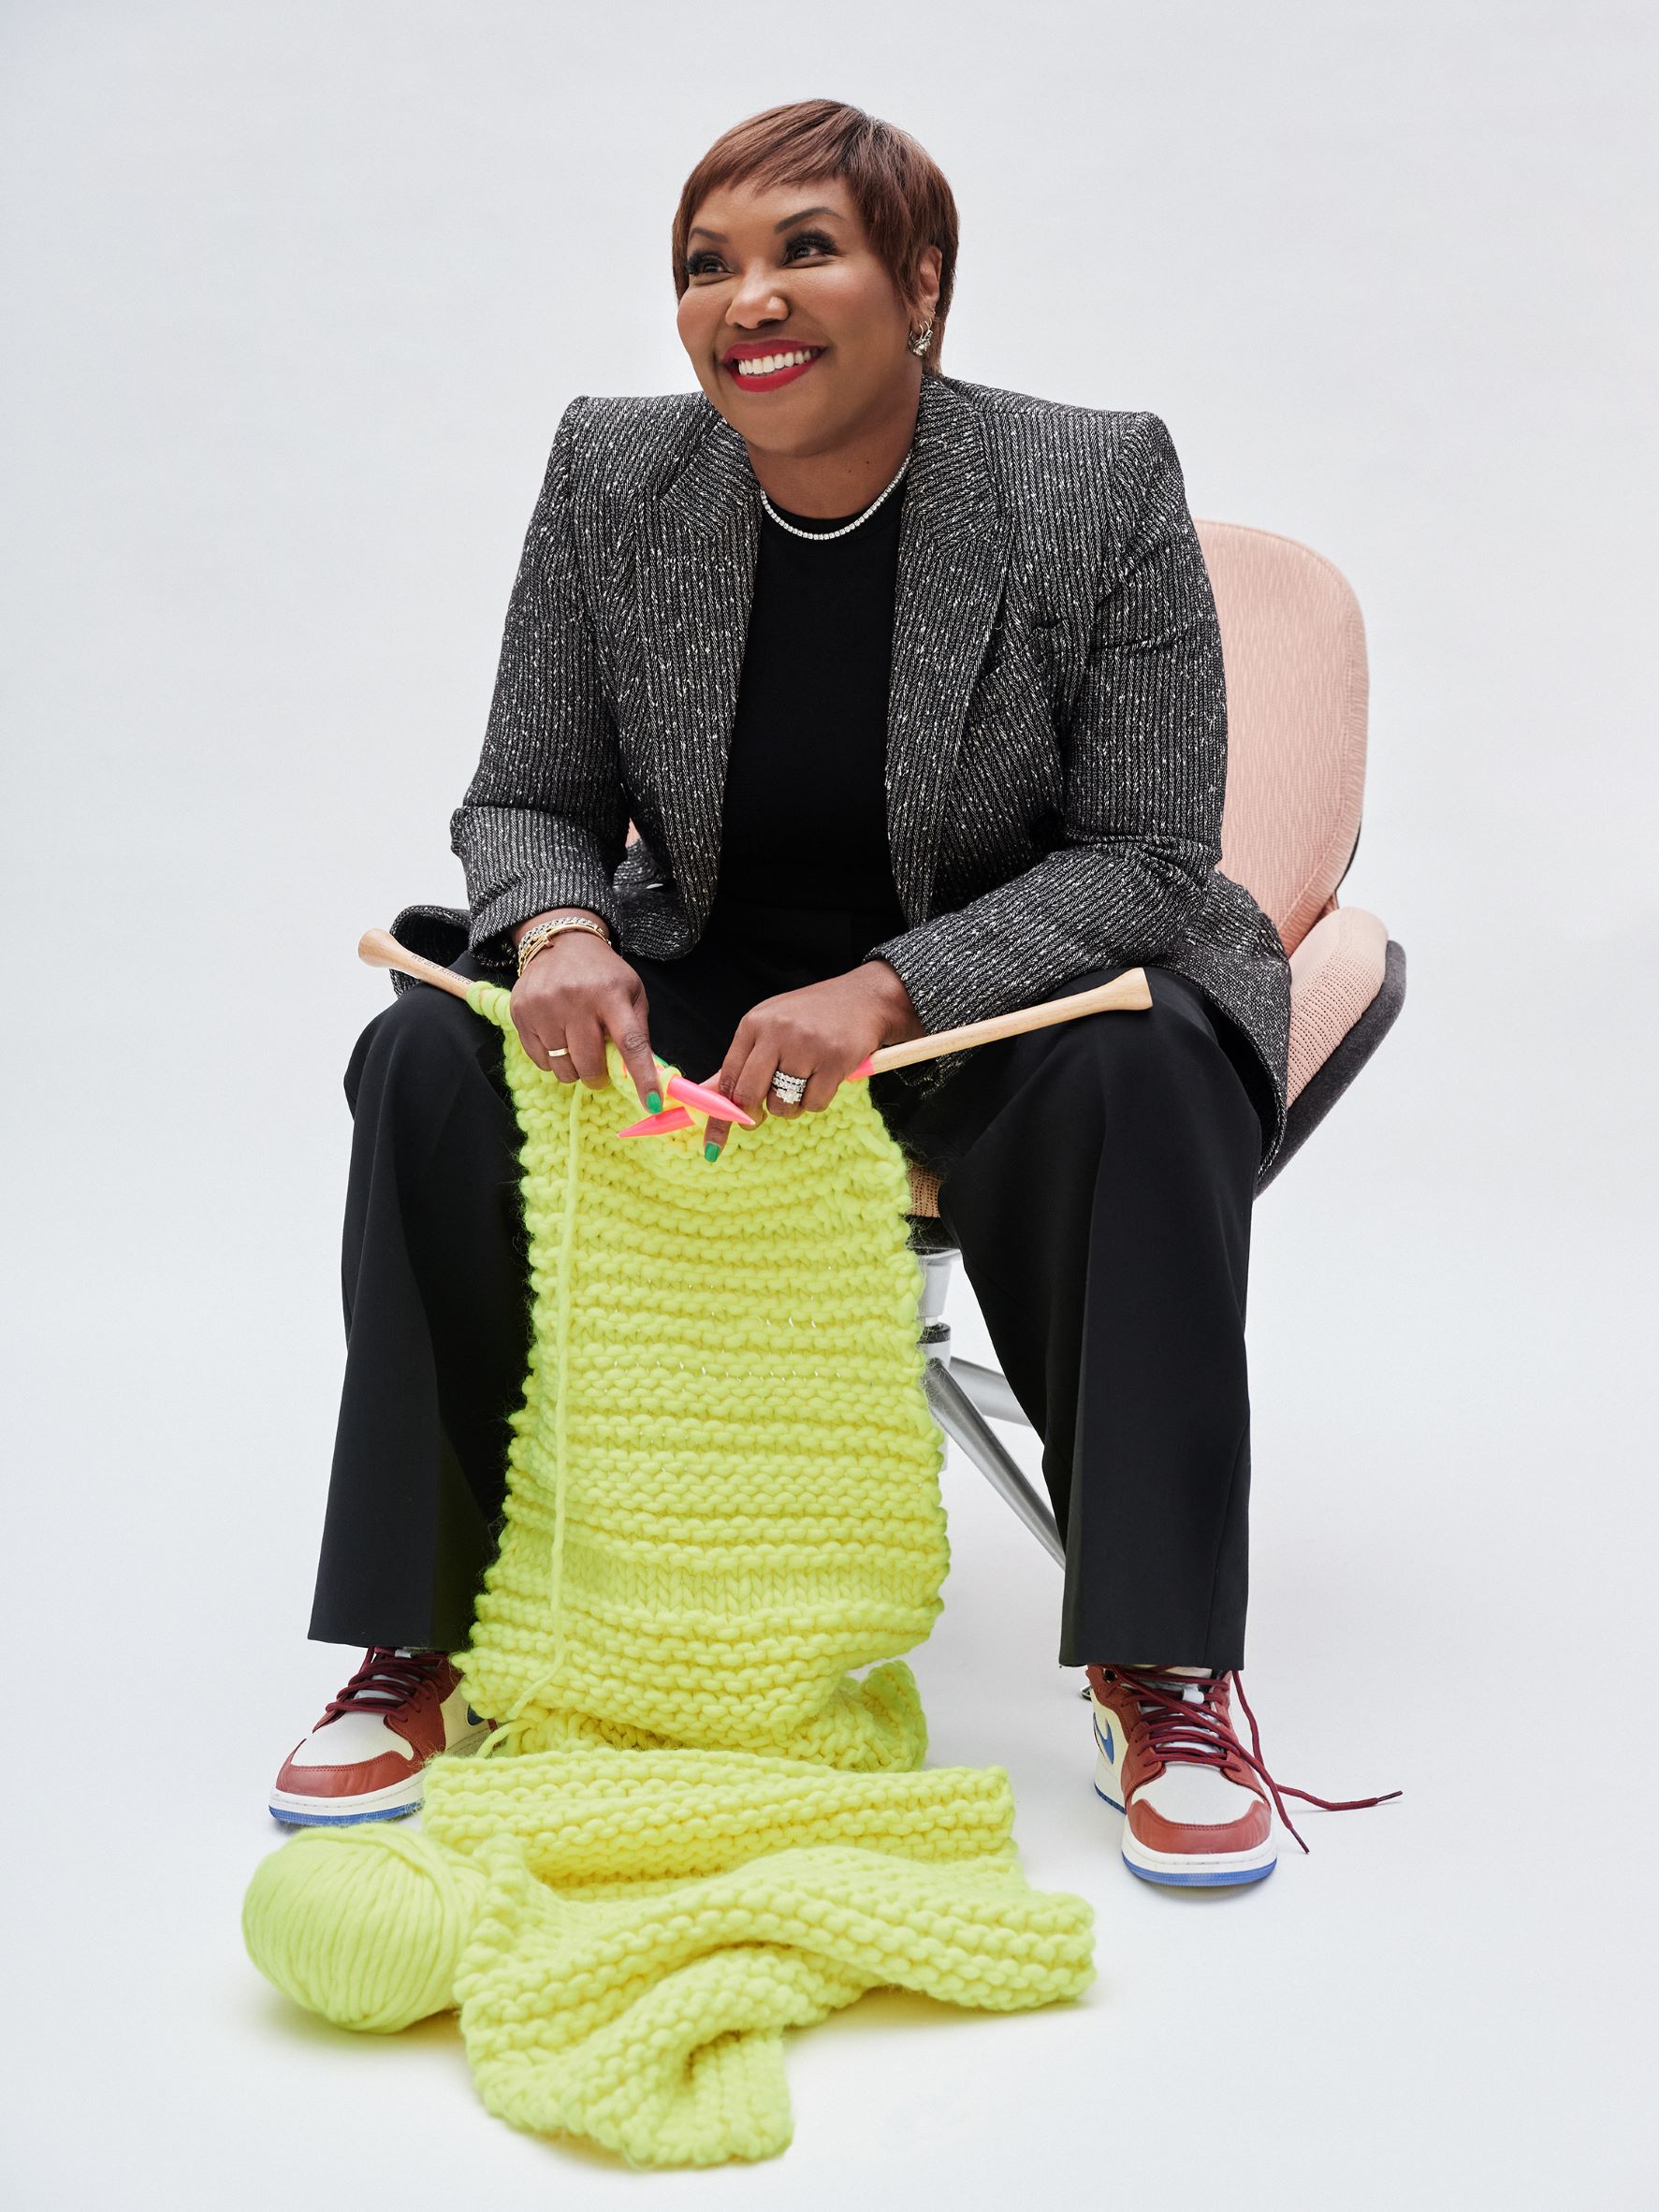 Amani Duncan sitting on a chair and knitting with yellow yarn